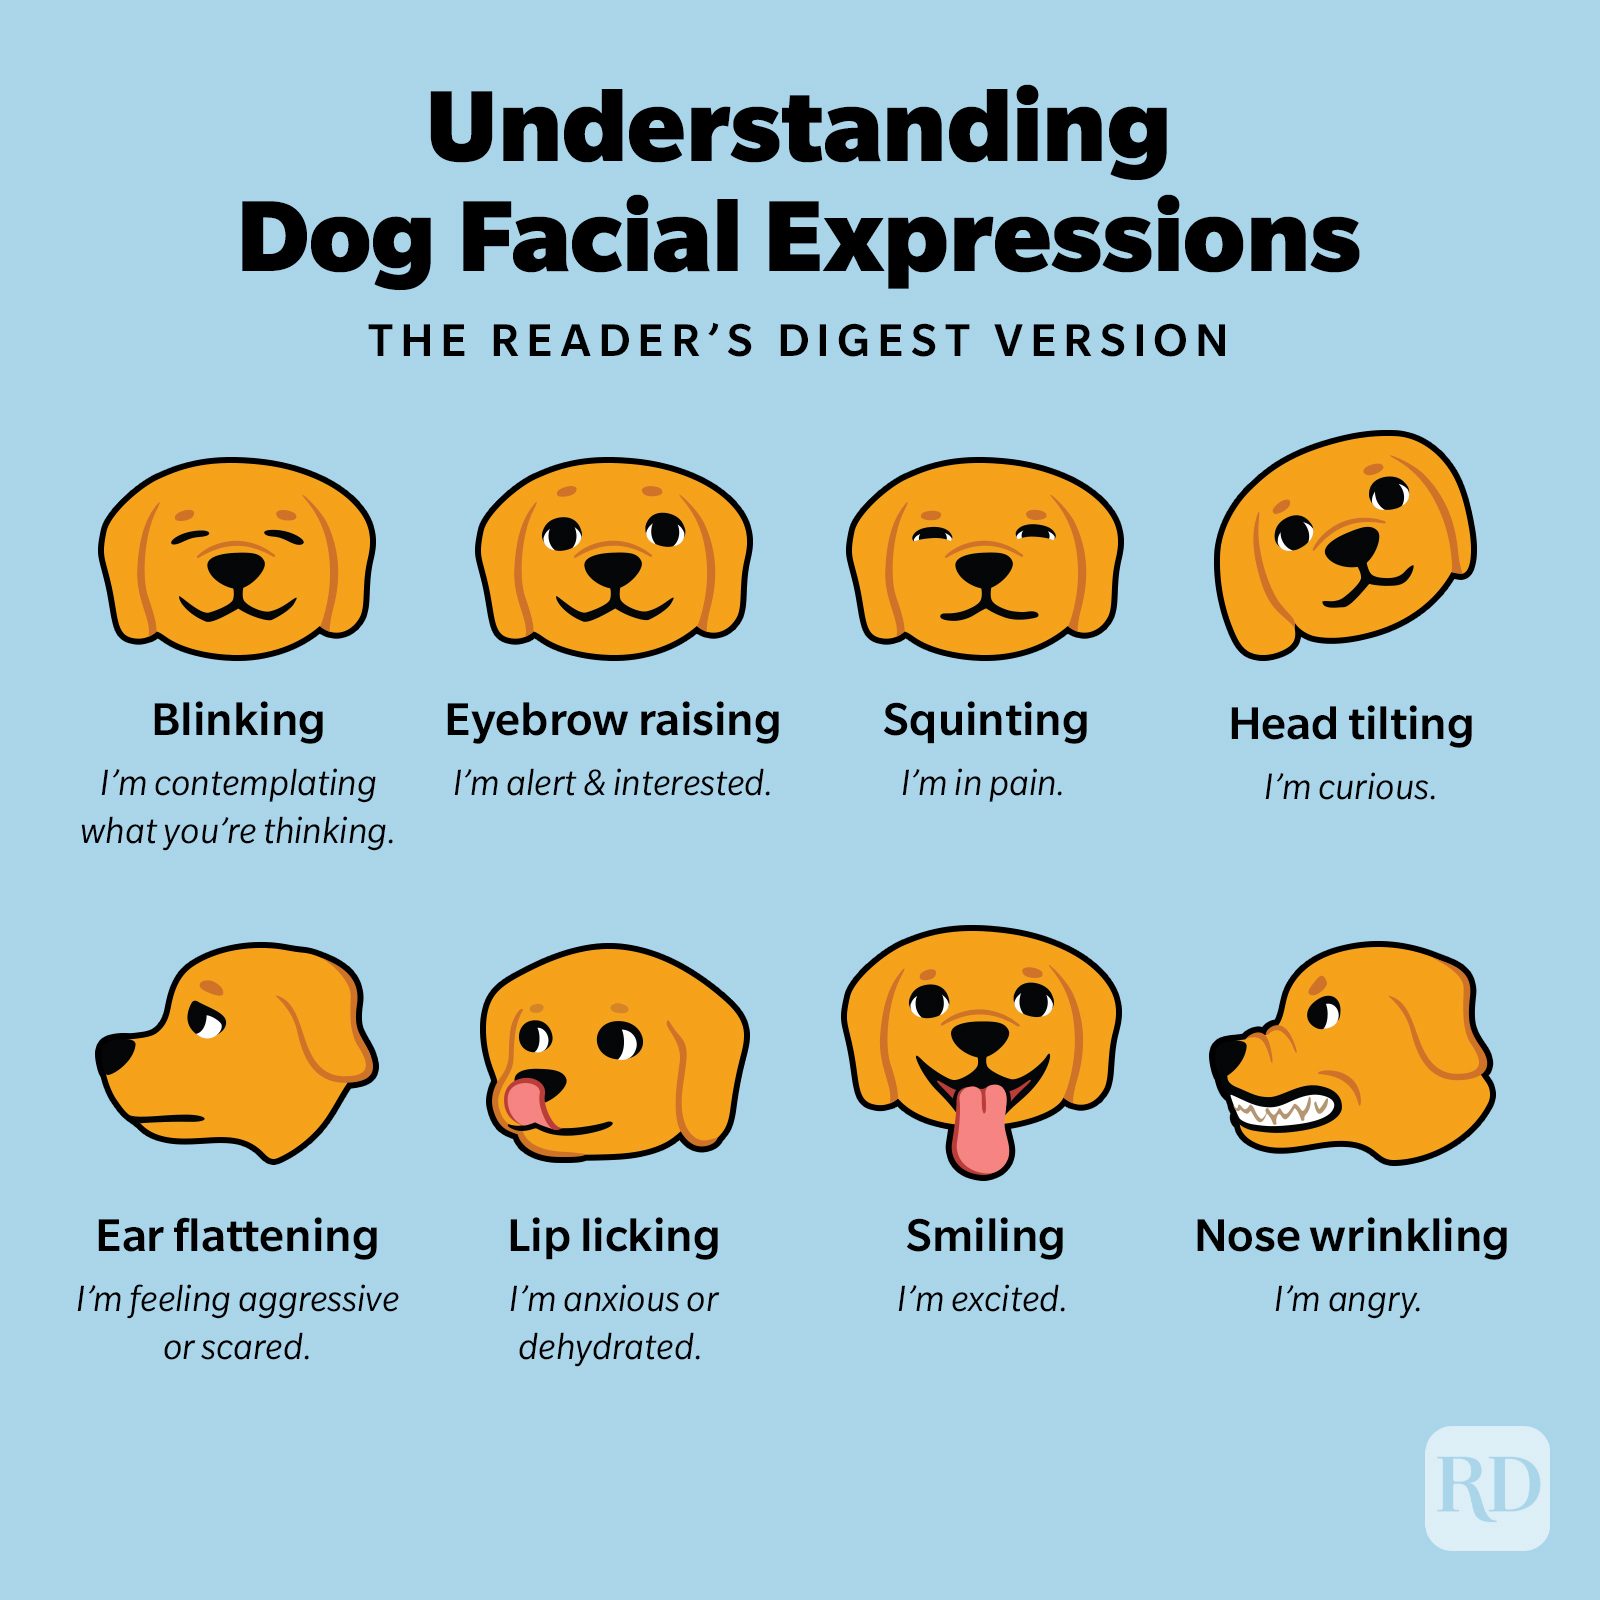 https://www.rd.com/wp-content/uploads/2022/05/RD-Understanding-Dog-Facial-Expressions-Infographic-Social.jpg?fit=700%2C700